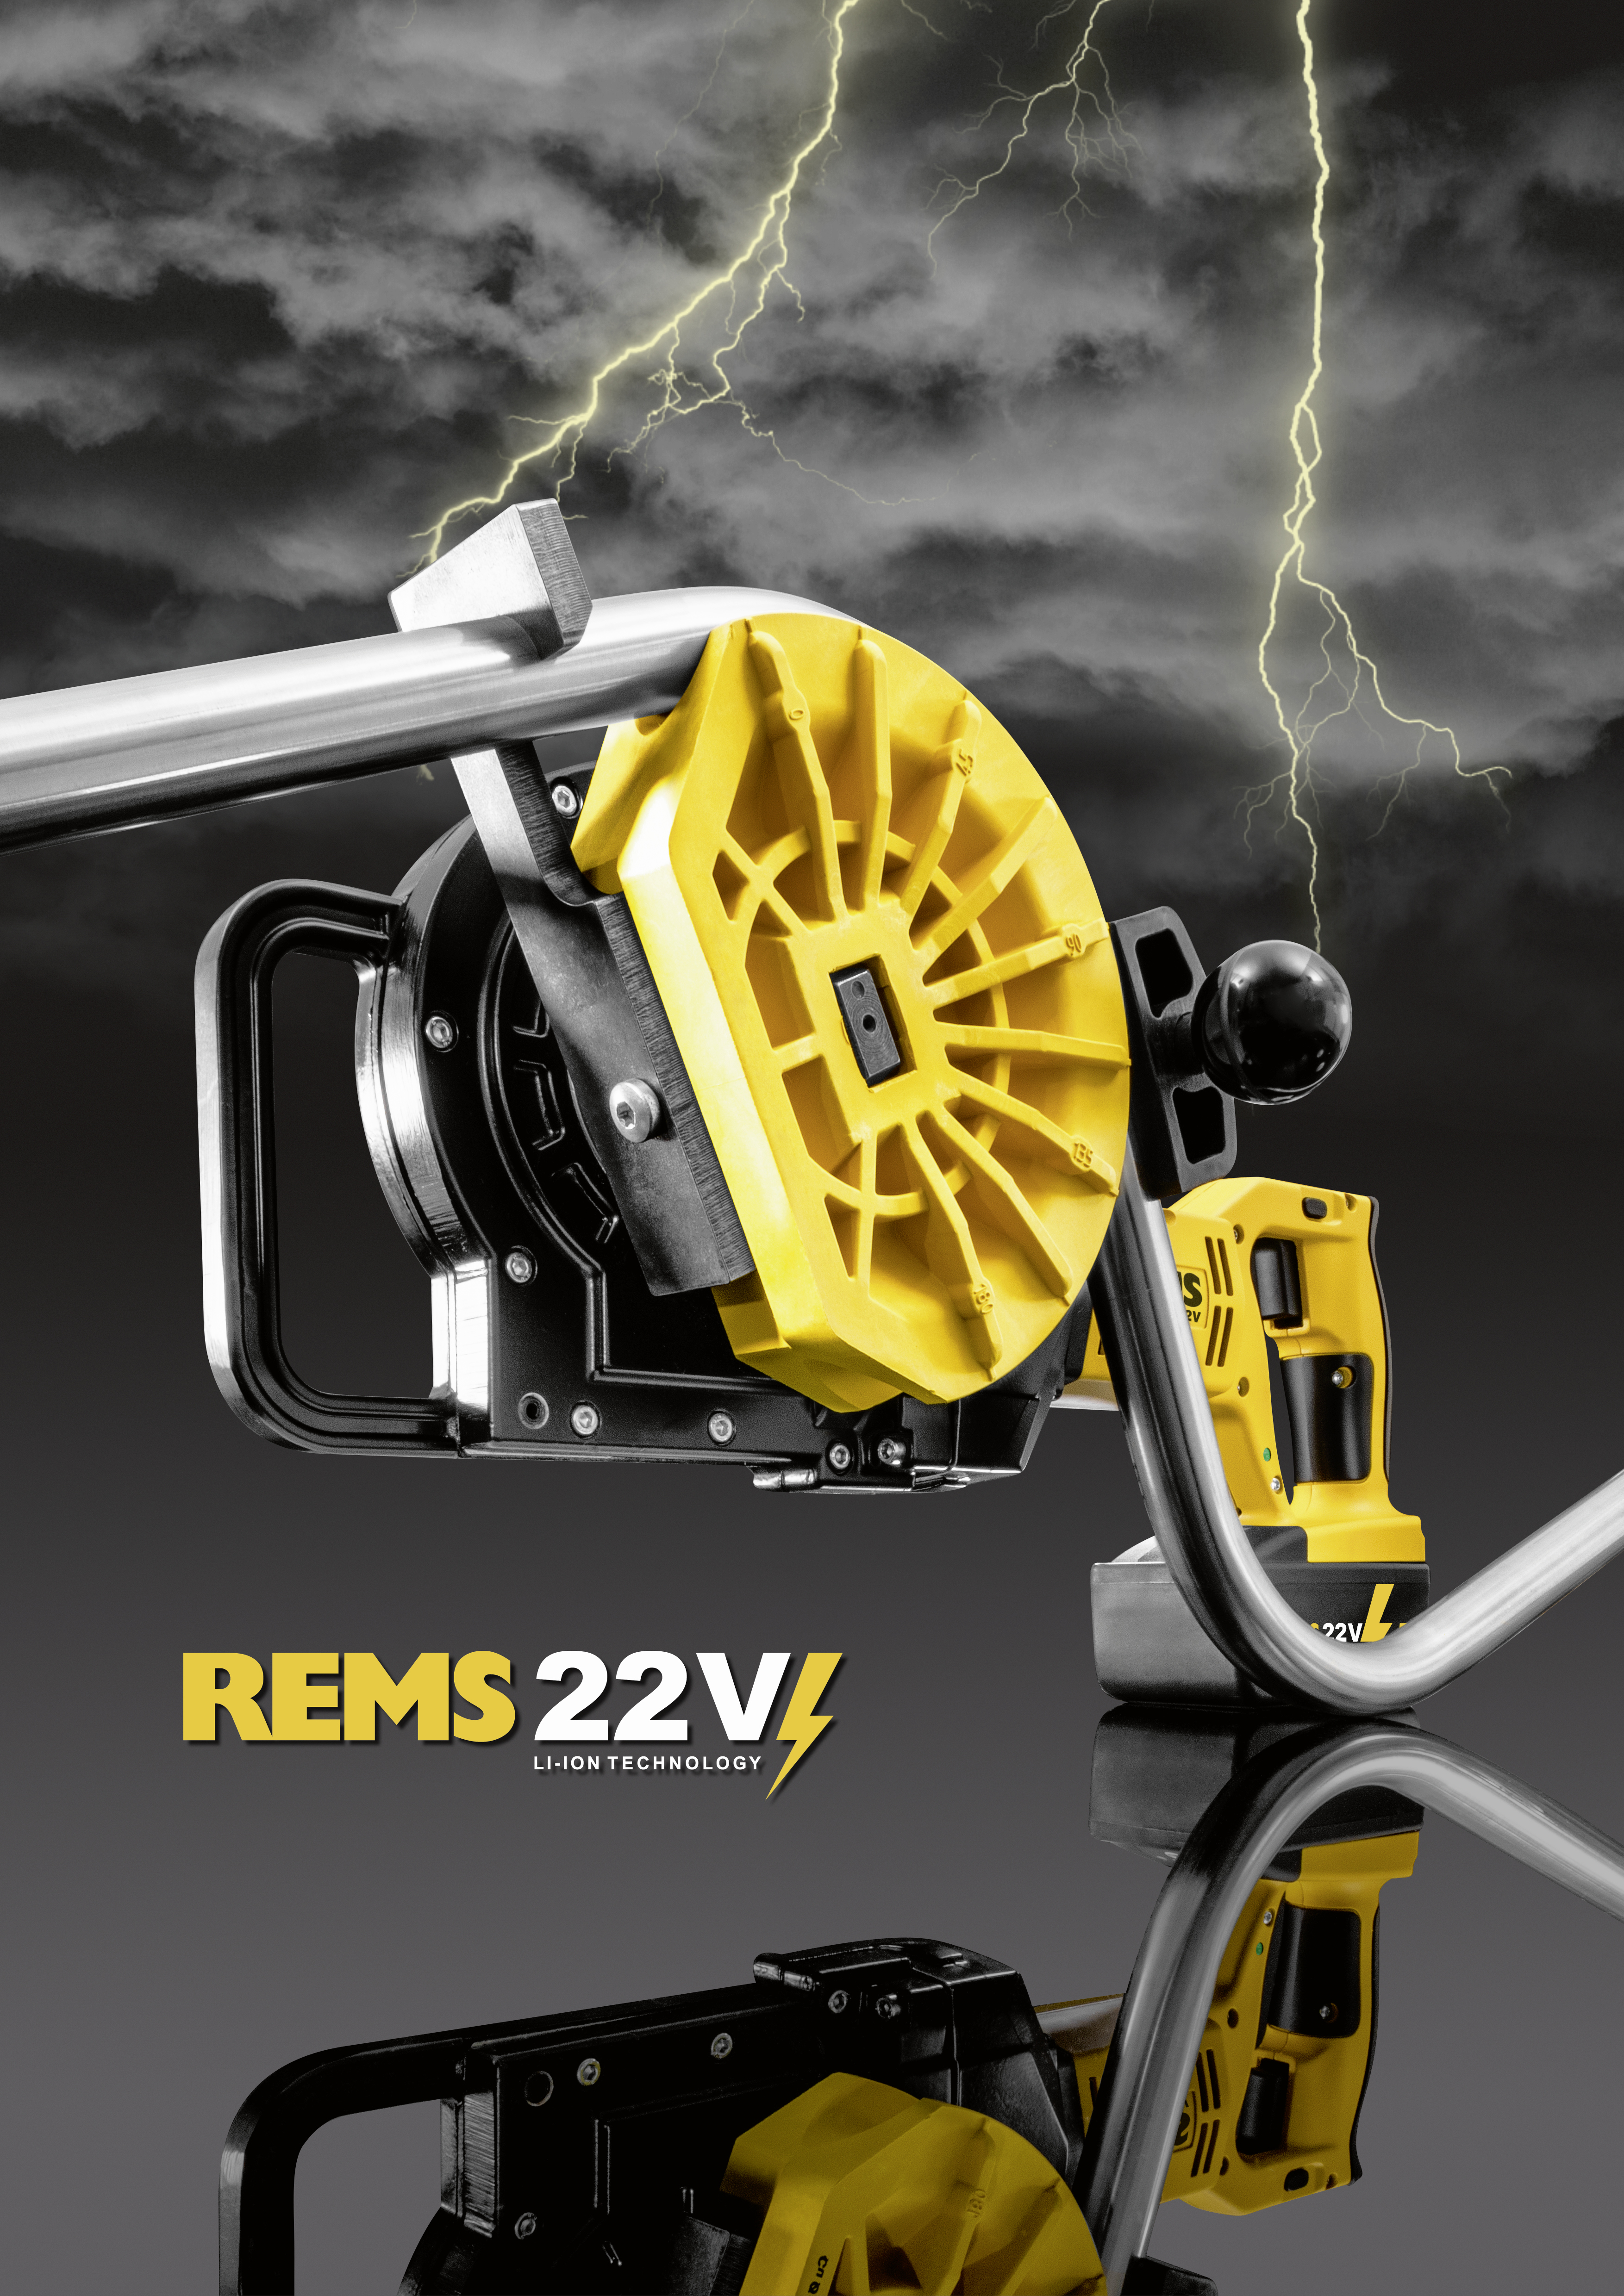 ISH - Exhibitors & Products - REMS GmbH & Co. KG